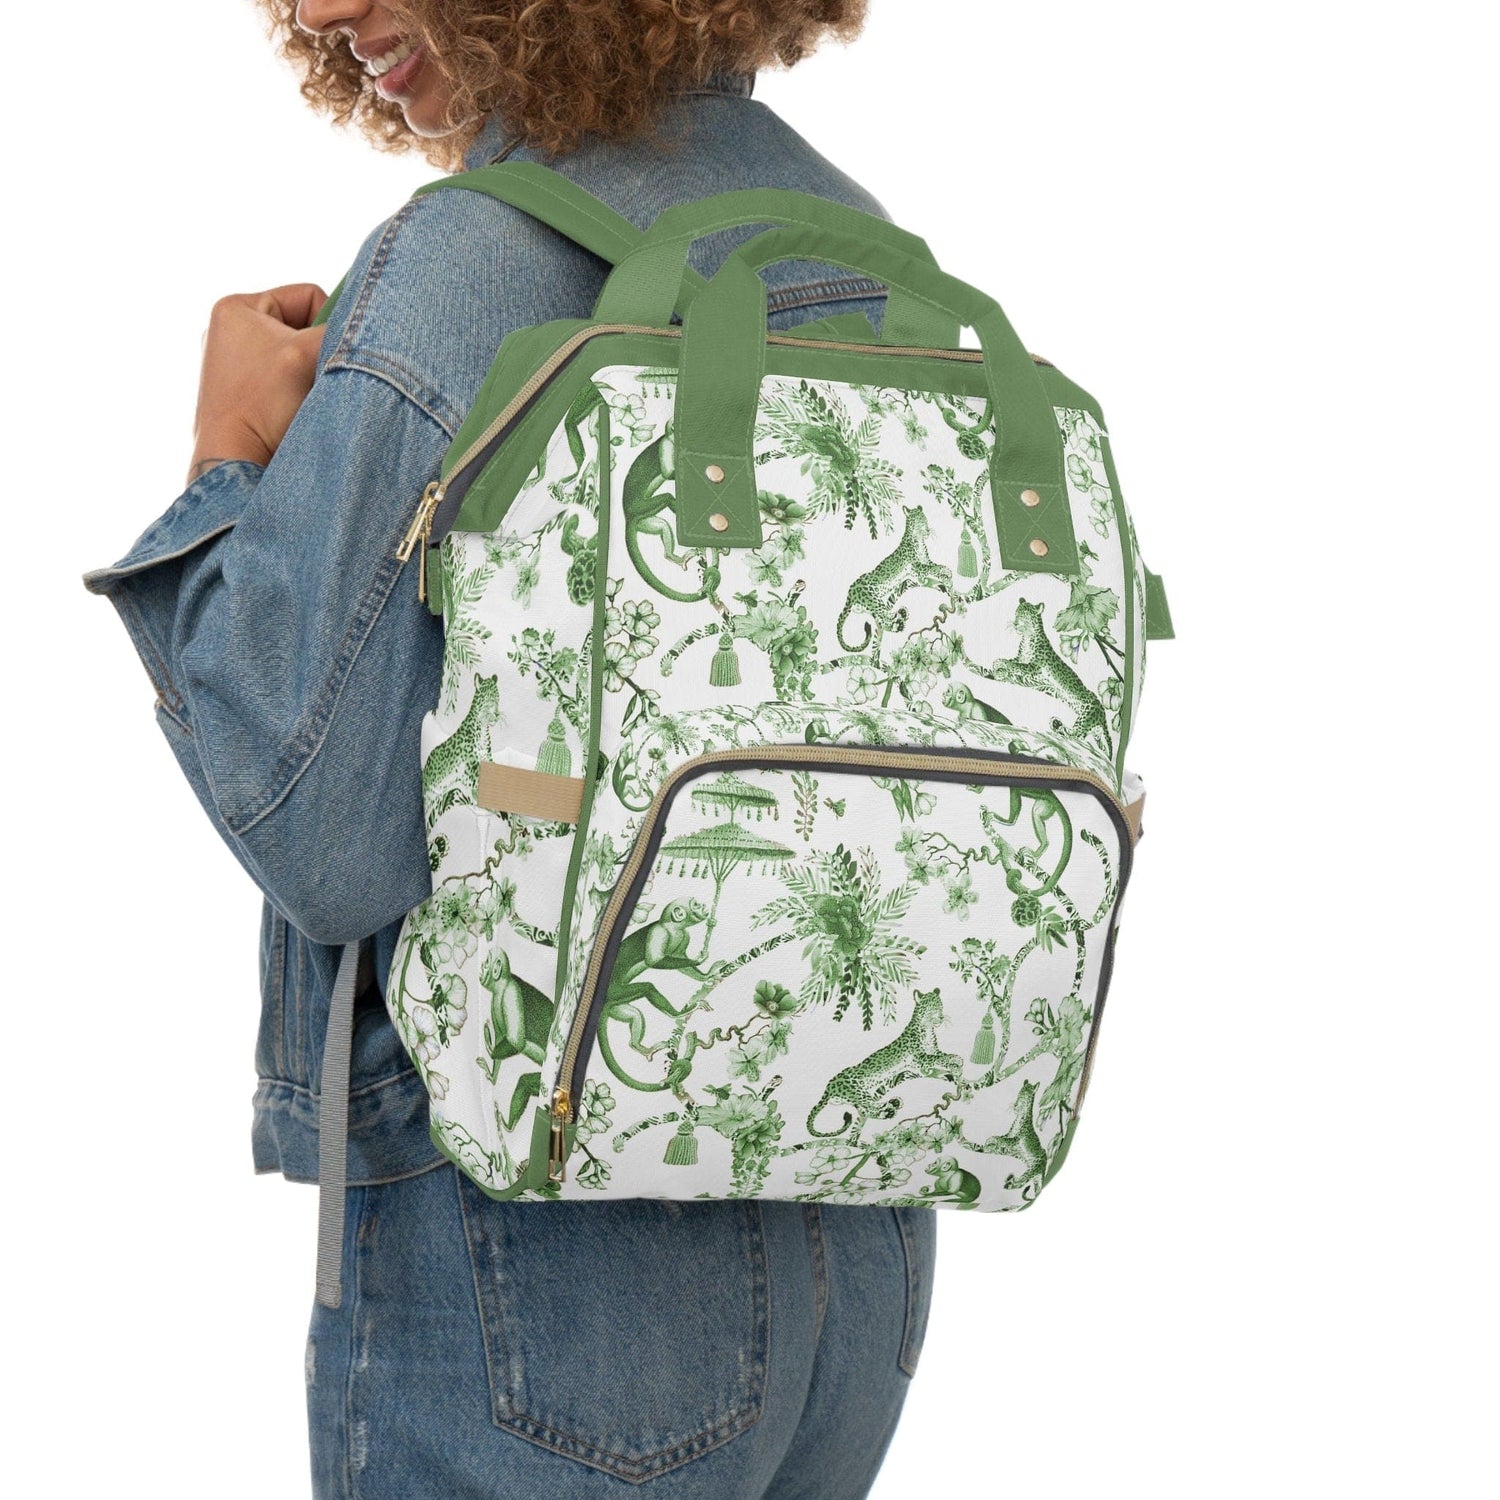 Kate McEnroe New York Floral Green and White Chinoiserie Jungle Multifunctional Backpack, Diaper Bag, Weekender Bag, Carry - on Luggage Bag, Multipurpose BackpackDiaper Bags16805015716788328462